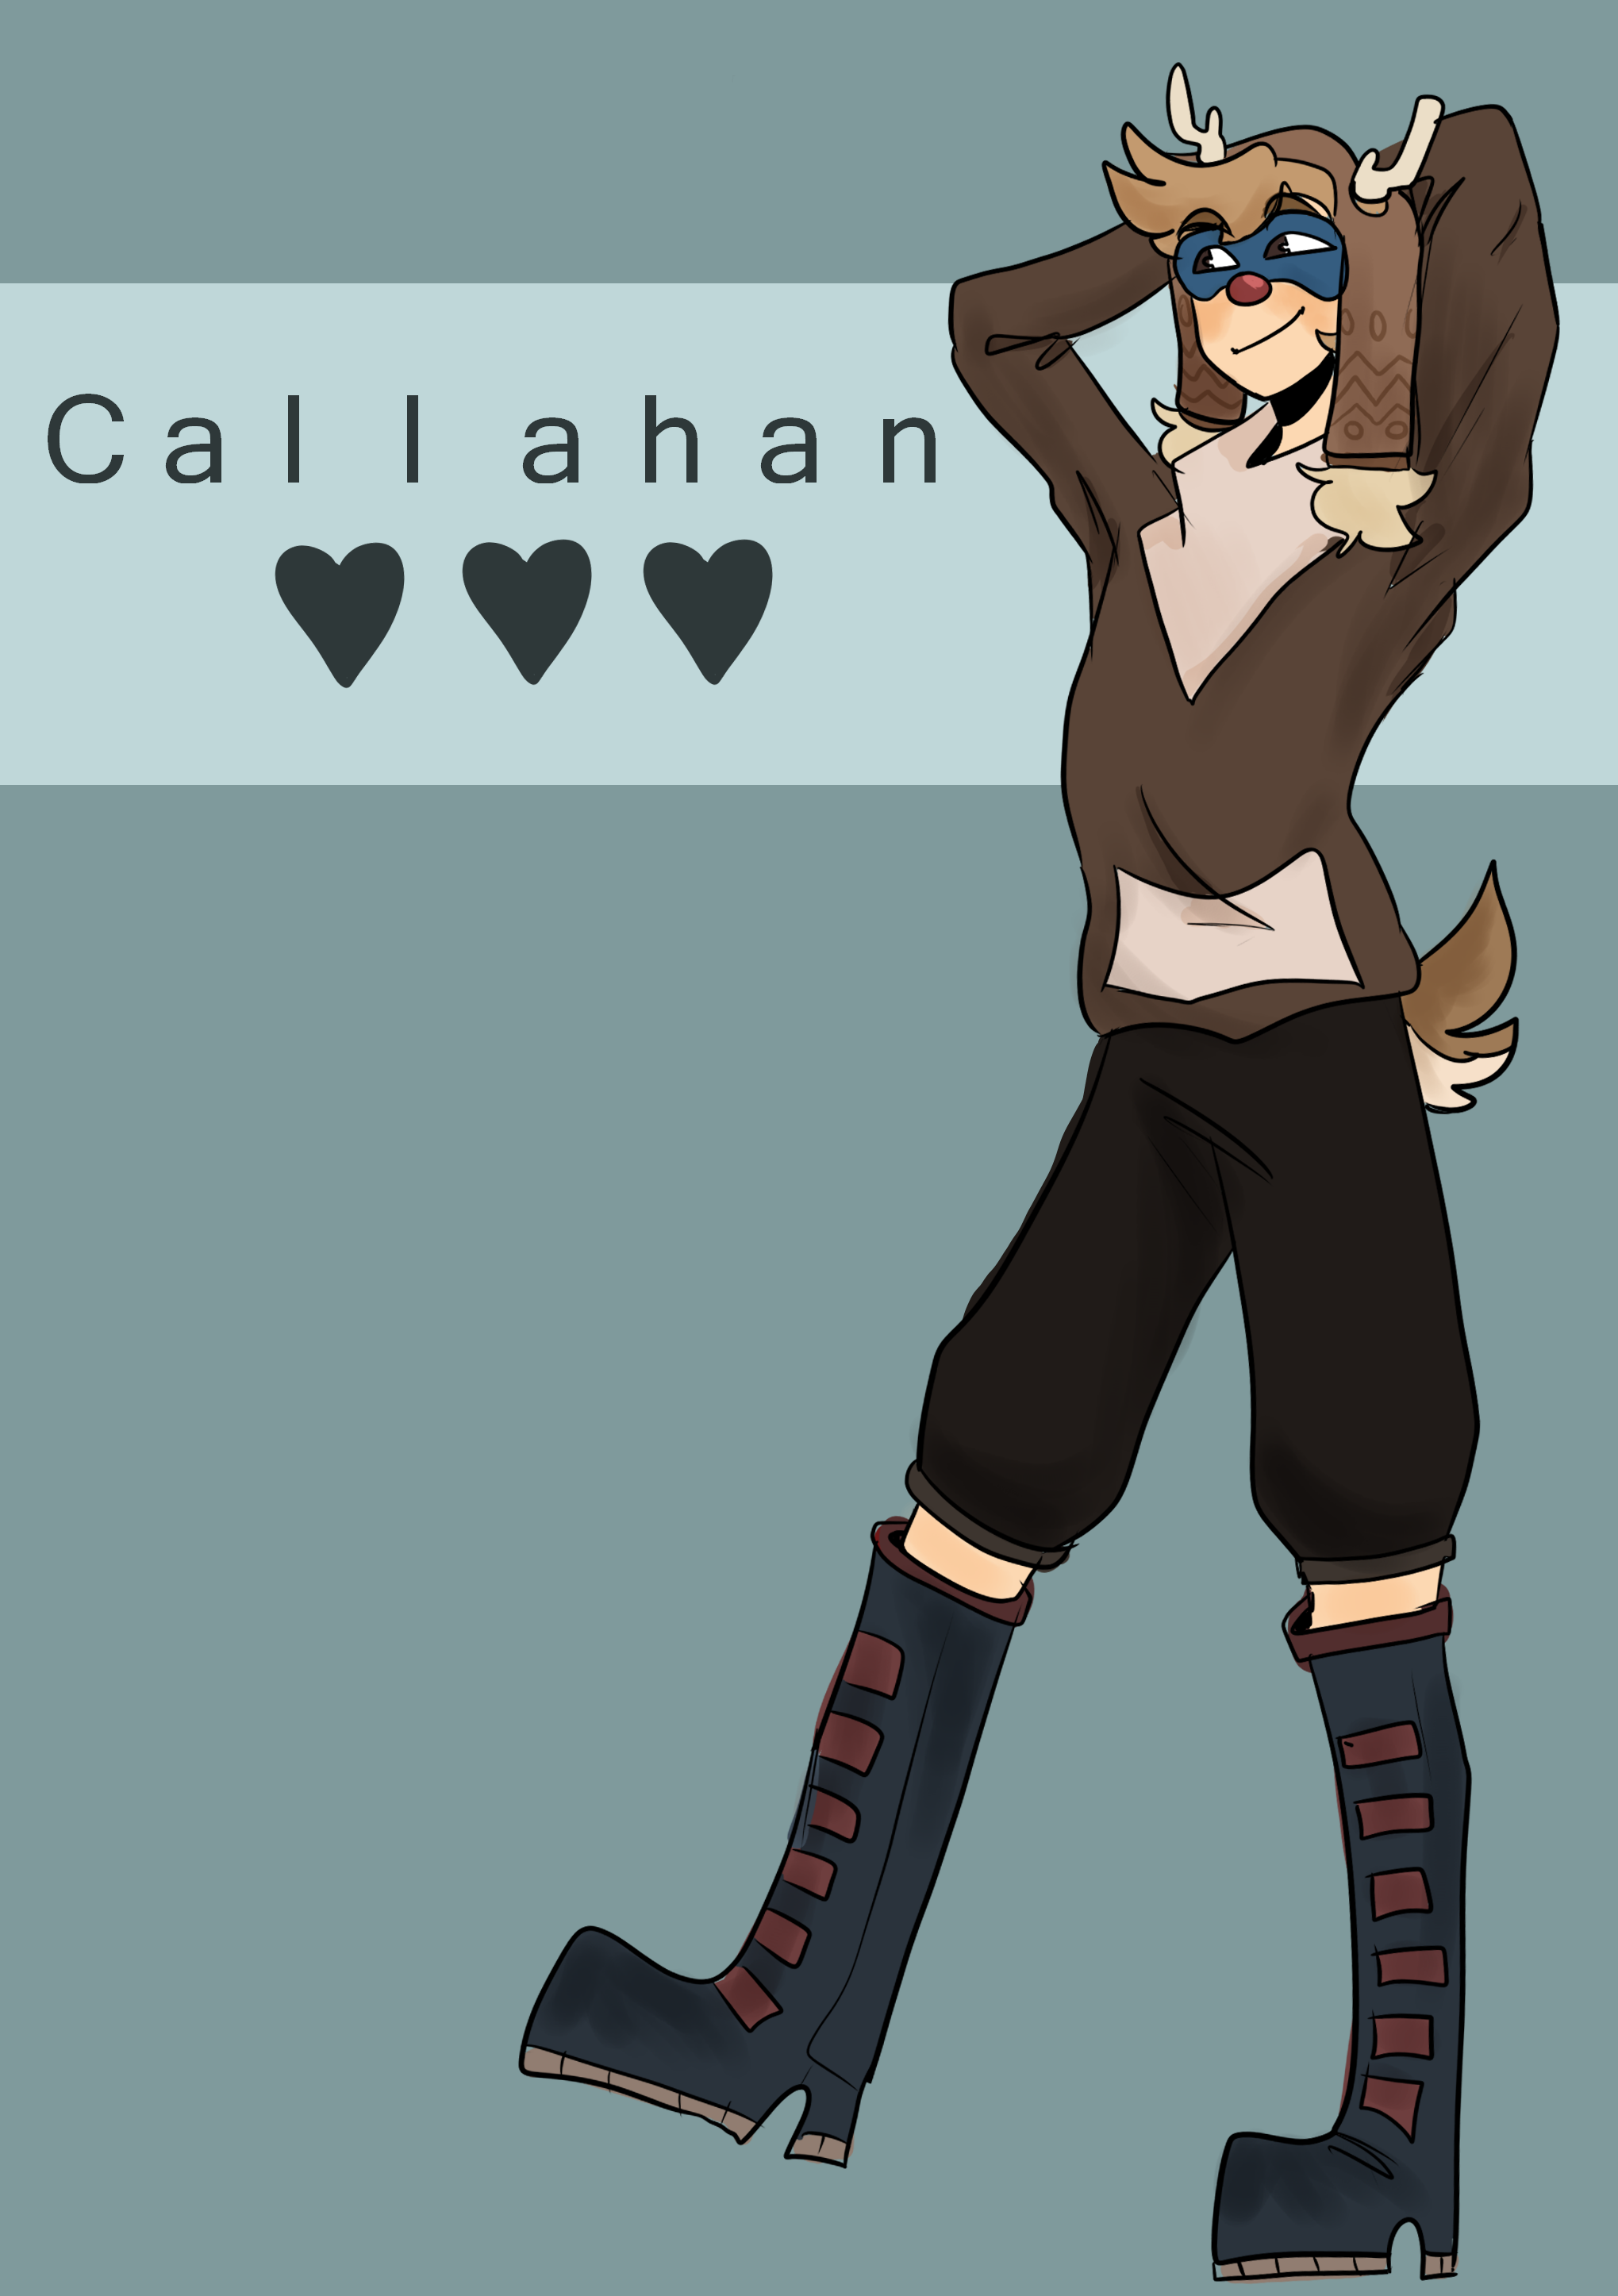 Who Is Callahan From Dream Smp